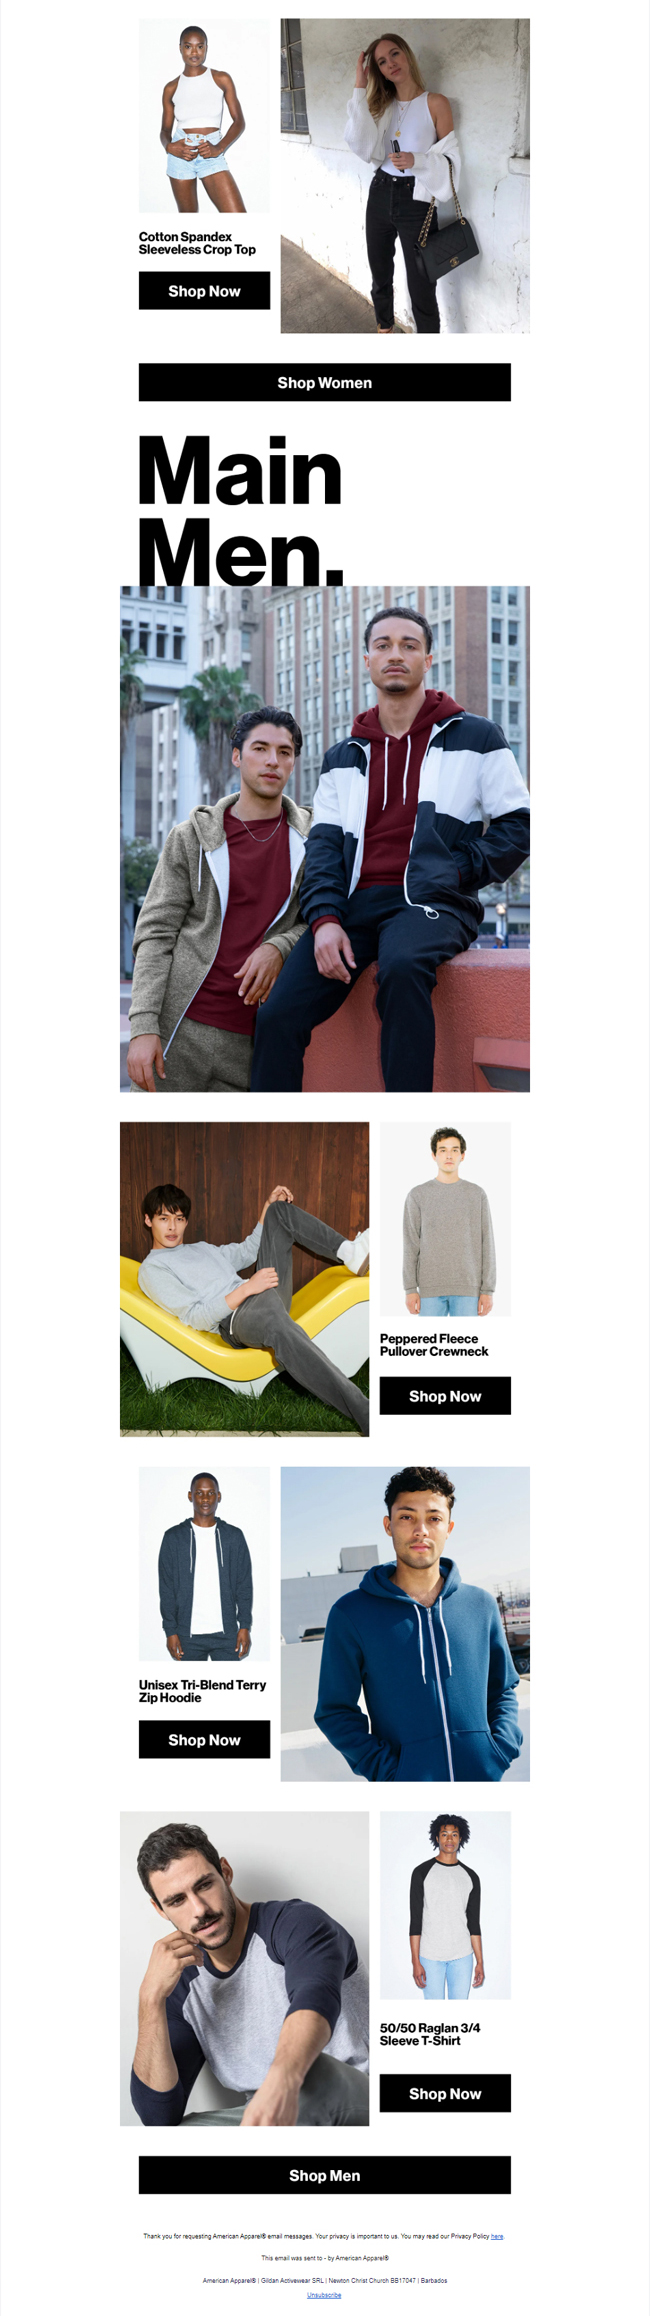 Thanksgiving email from American Apparel